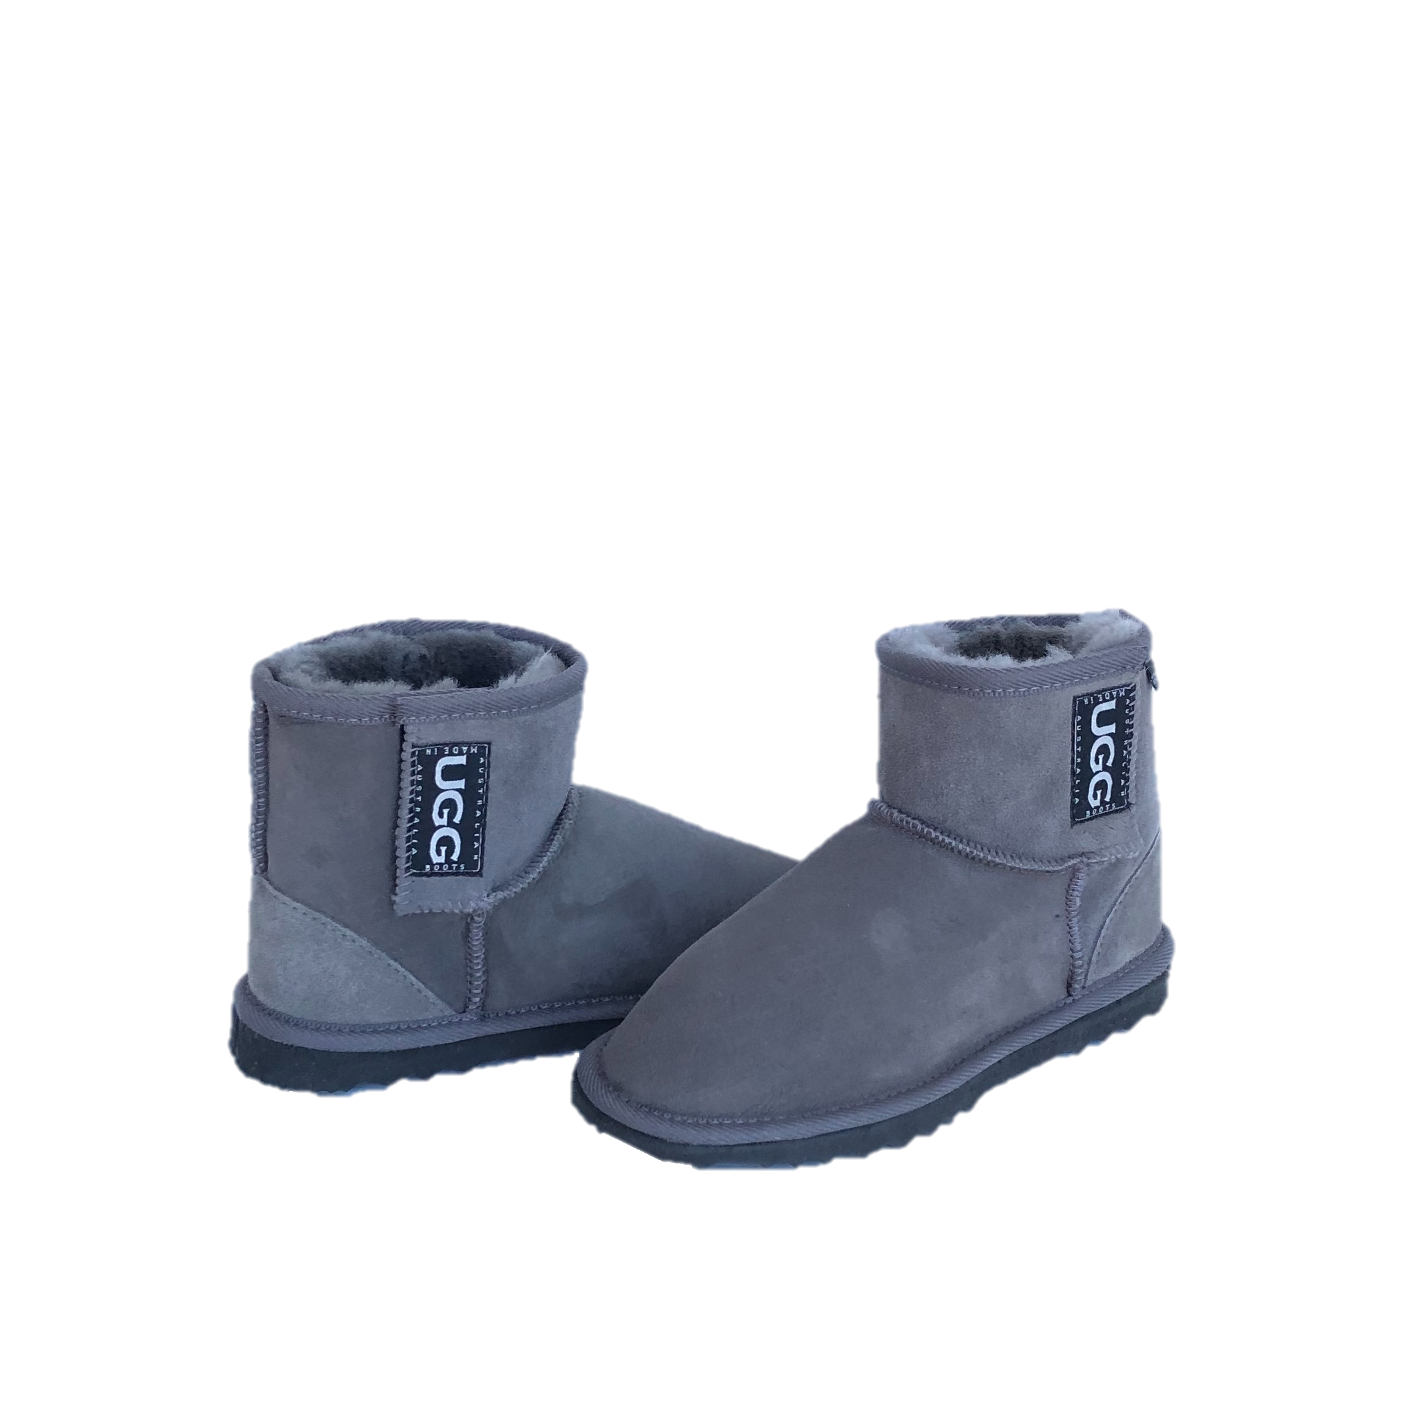 Kid's Ugg Boots in Grey